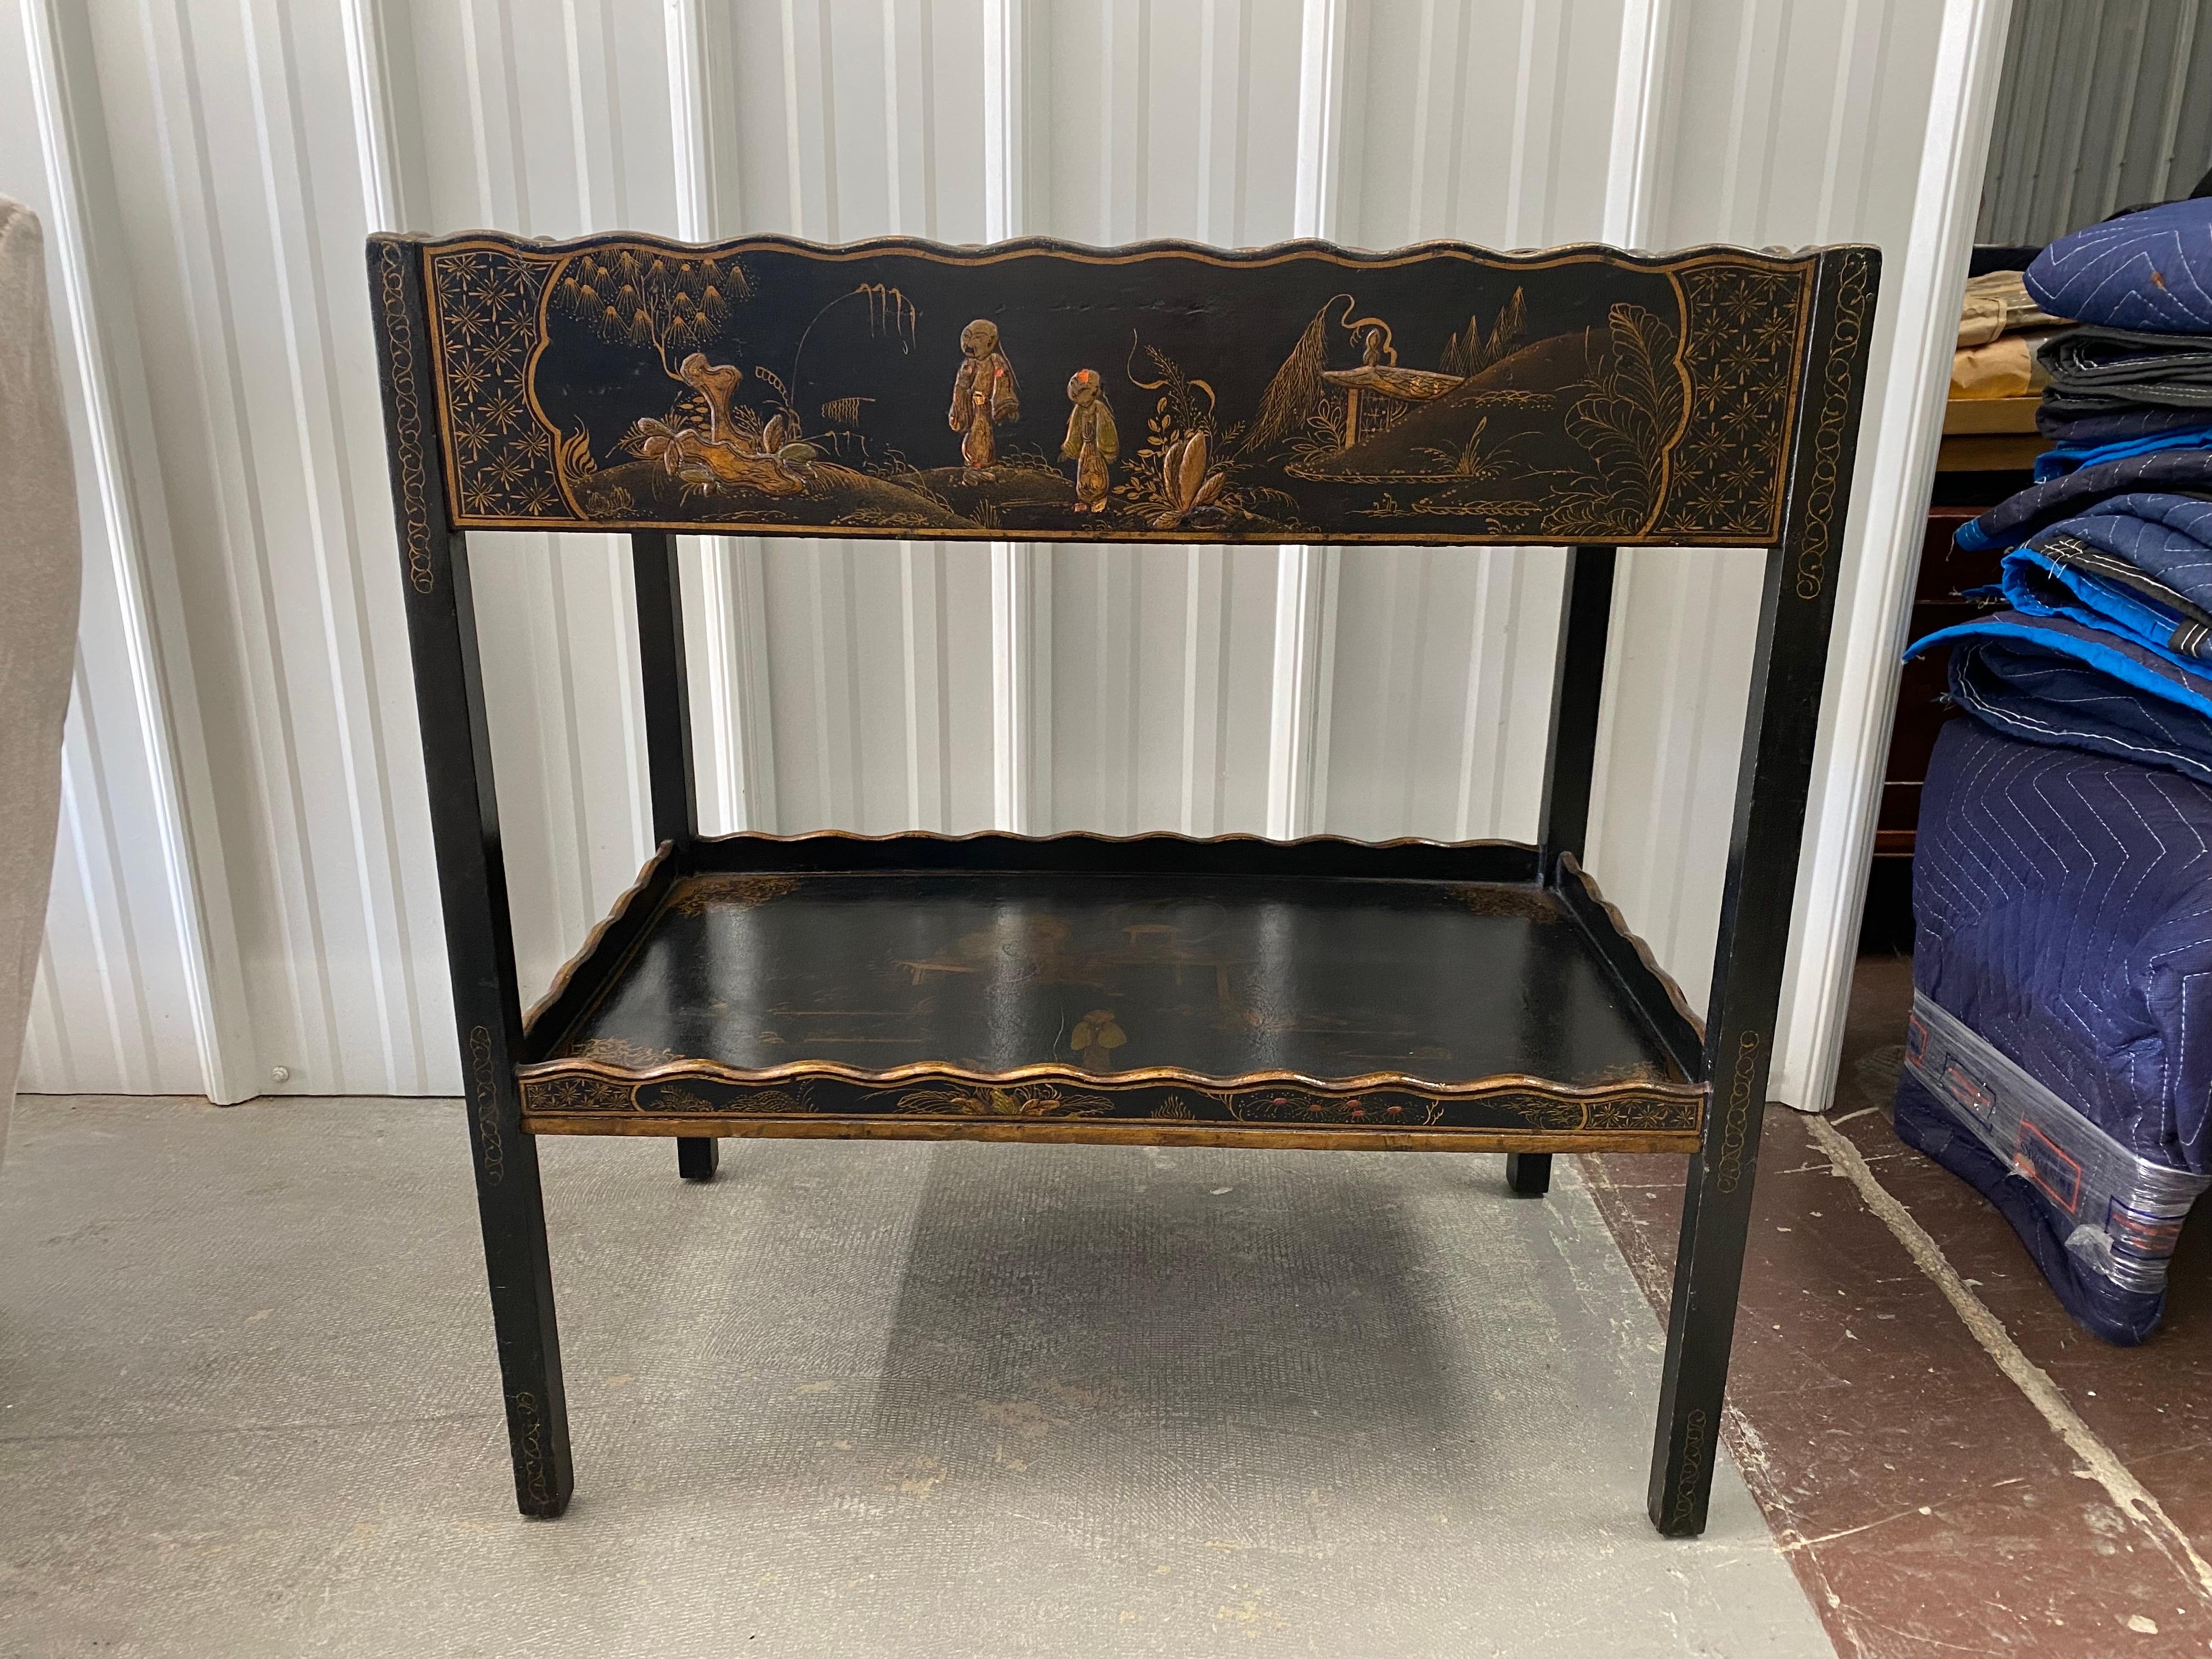 George III Style Lacquer Tea Table with Drawer.
A lovely narrow tea table, black lacquered, japanned with a beautiful elaborately painted scene on the top. Scallop edge rail on top and bottom shelf. Straight legs. A single middle drawer.
Small chips